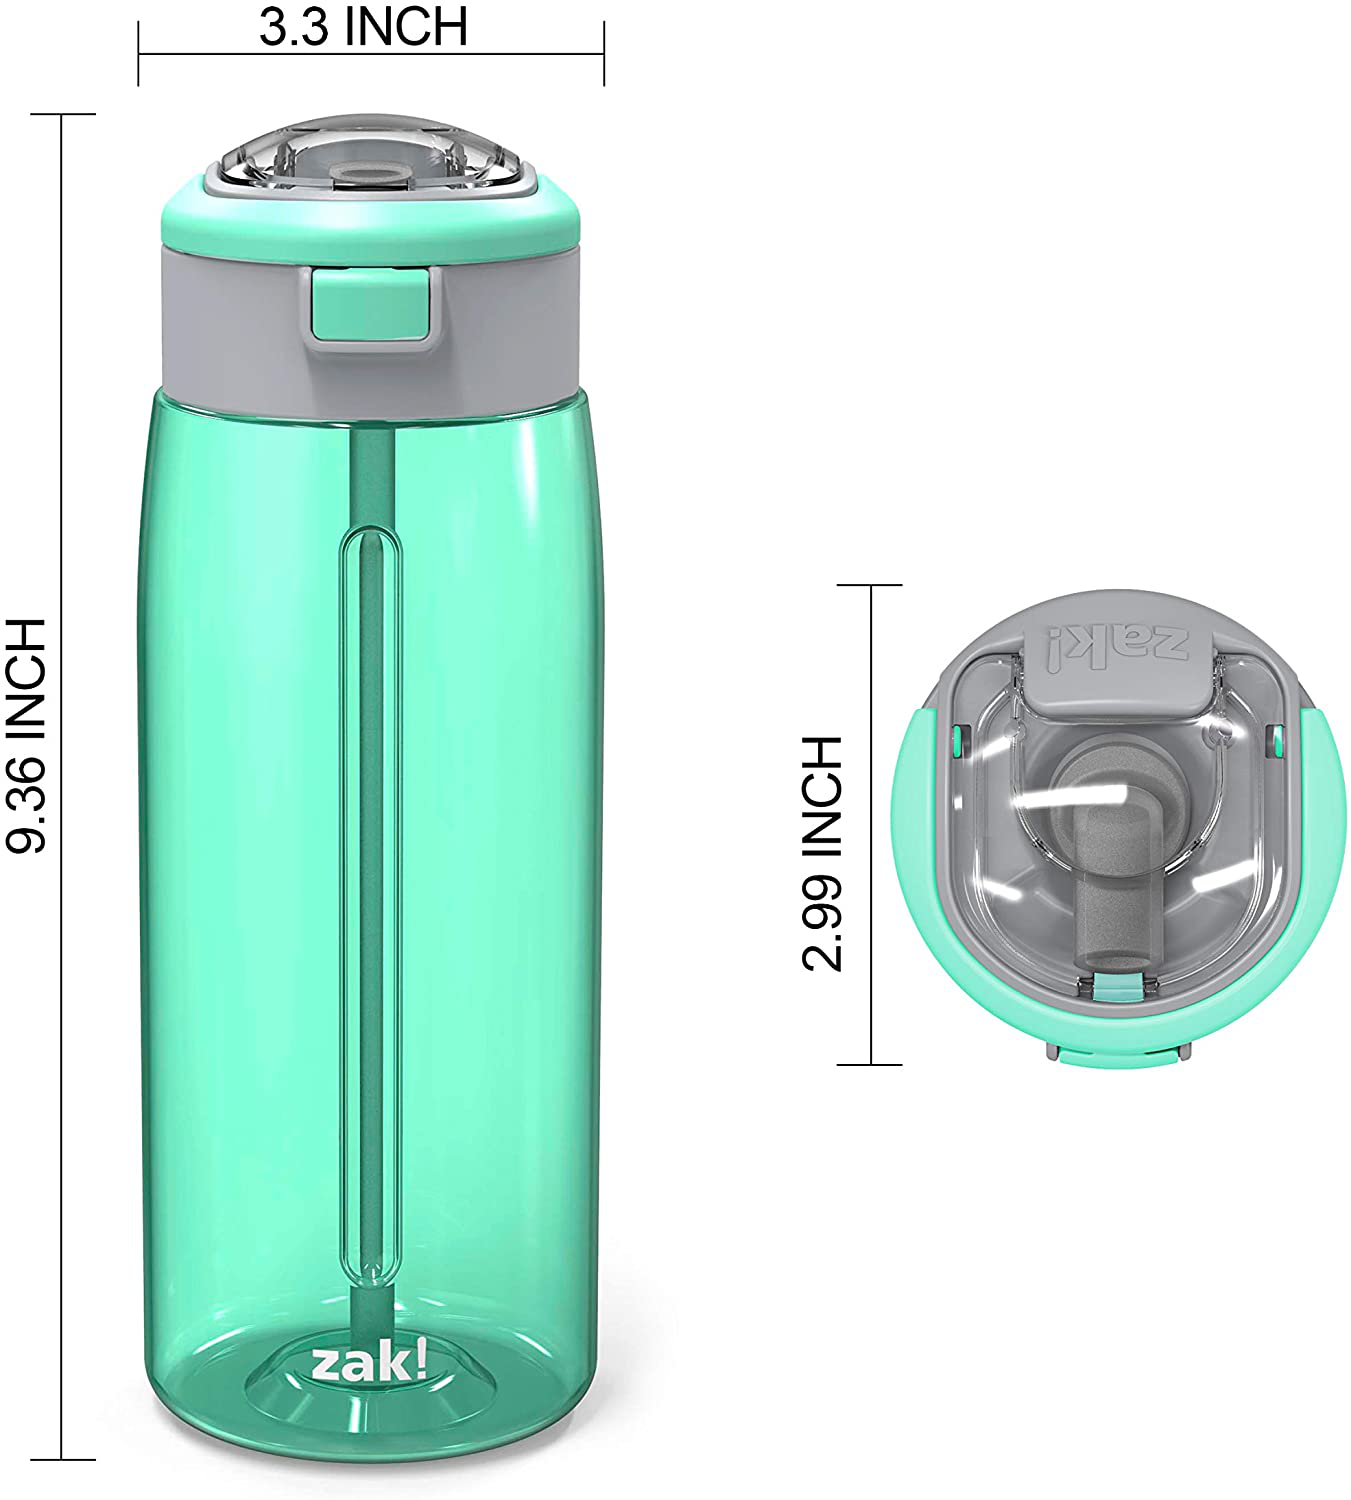 Zak Designs Genesis Durable Plastic Water Bottle with Interchangeable Lid and Built-In Carry Handle, Leak-Proof Design is Perfect for Outdoor Sports (32oz, Lilac)